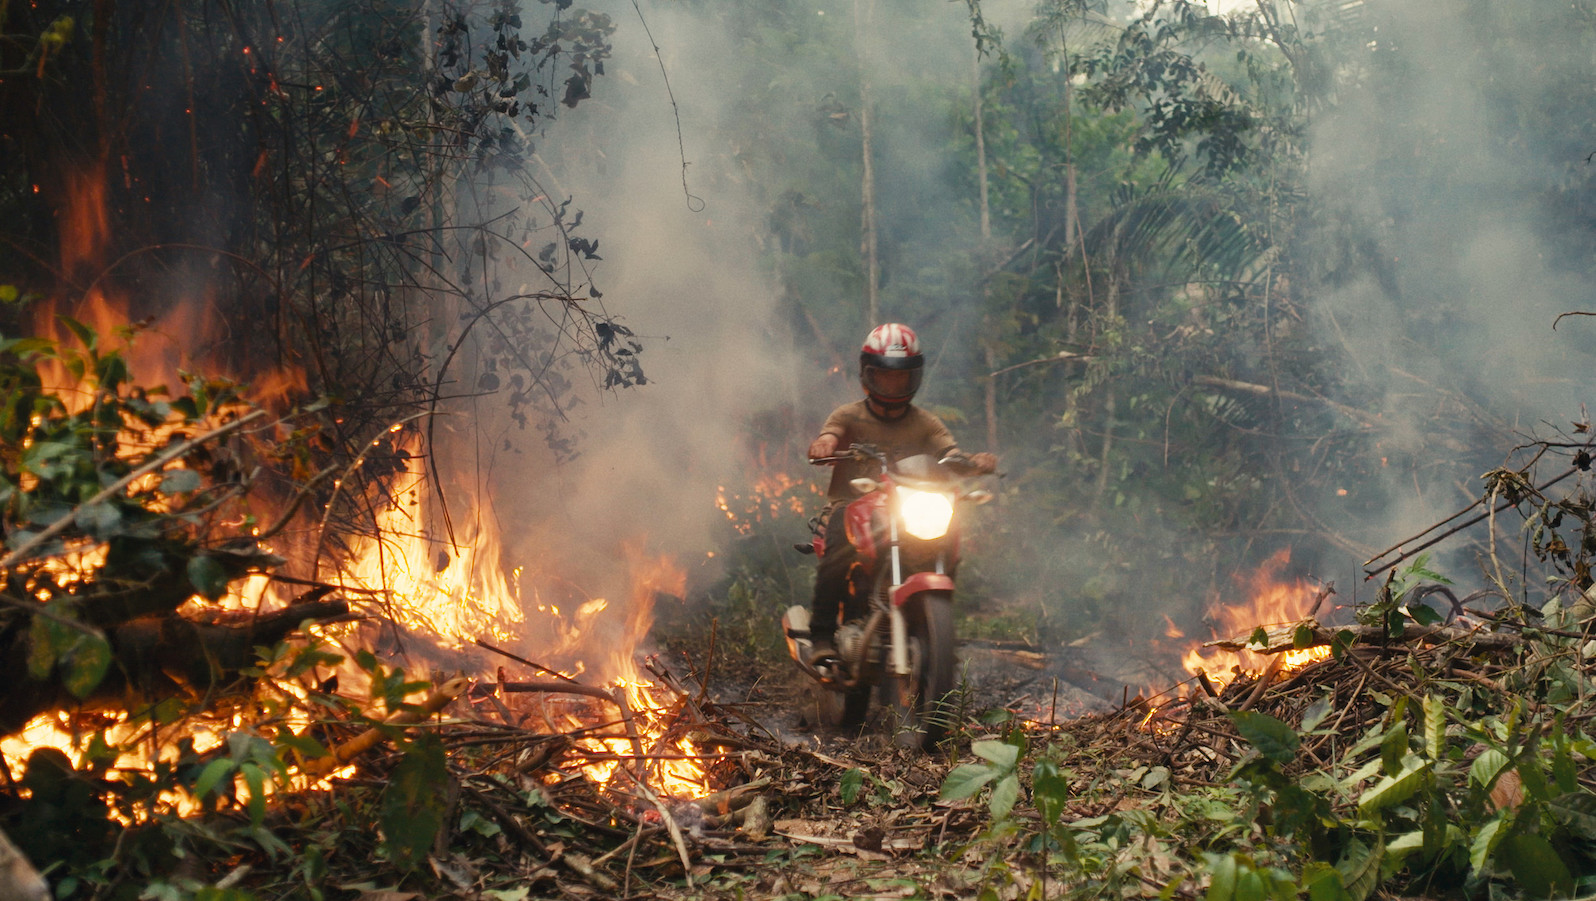 An invader rides his motorcycle through the rainforest fire blaze.